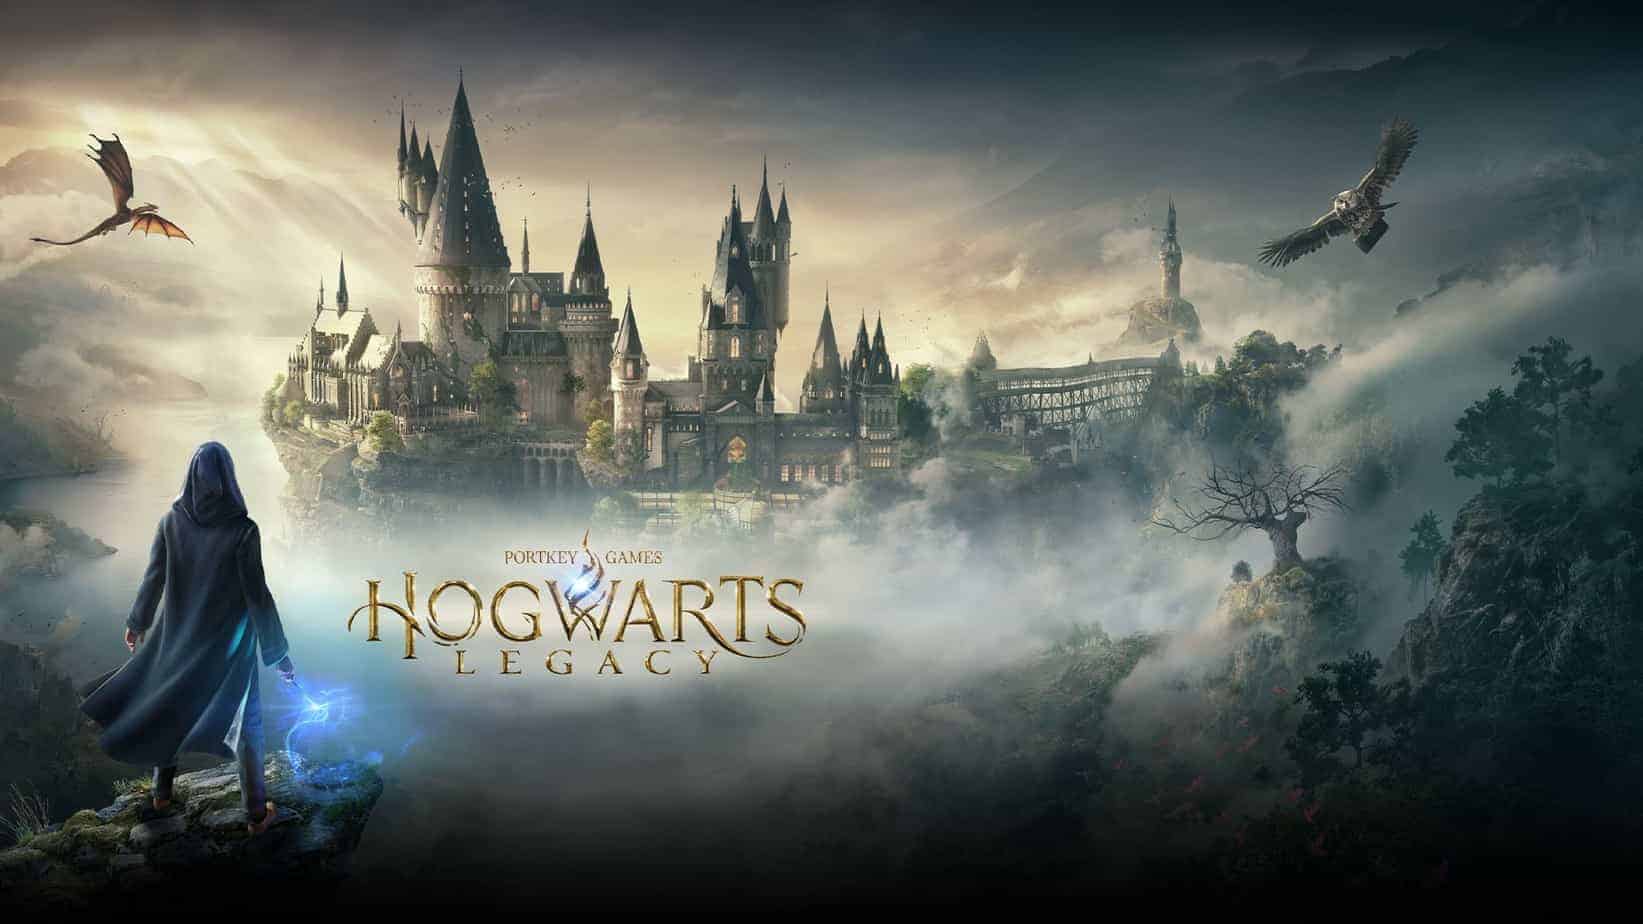 Devs confirm Playstation exclusive content for Hogwarts Legacy